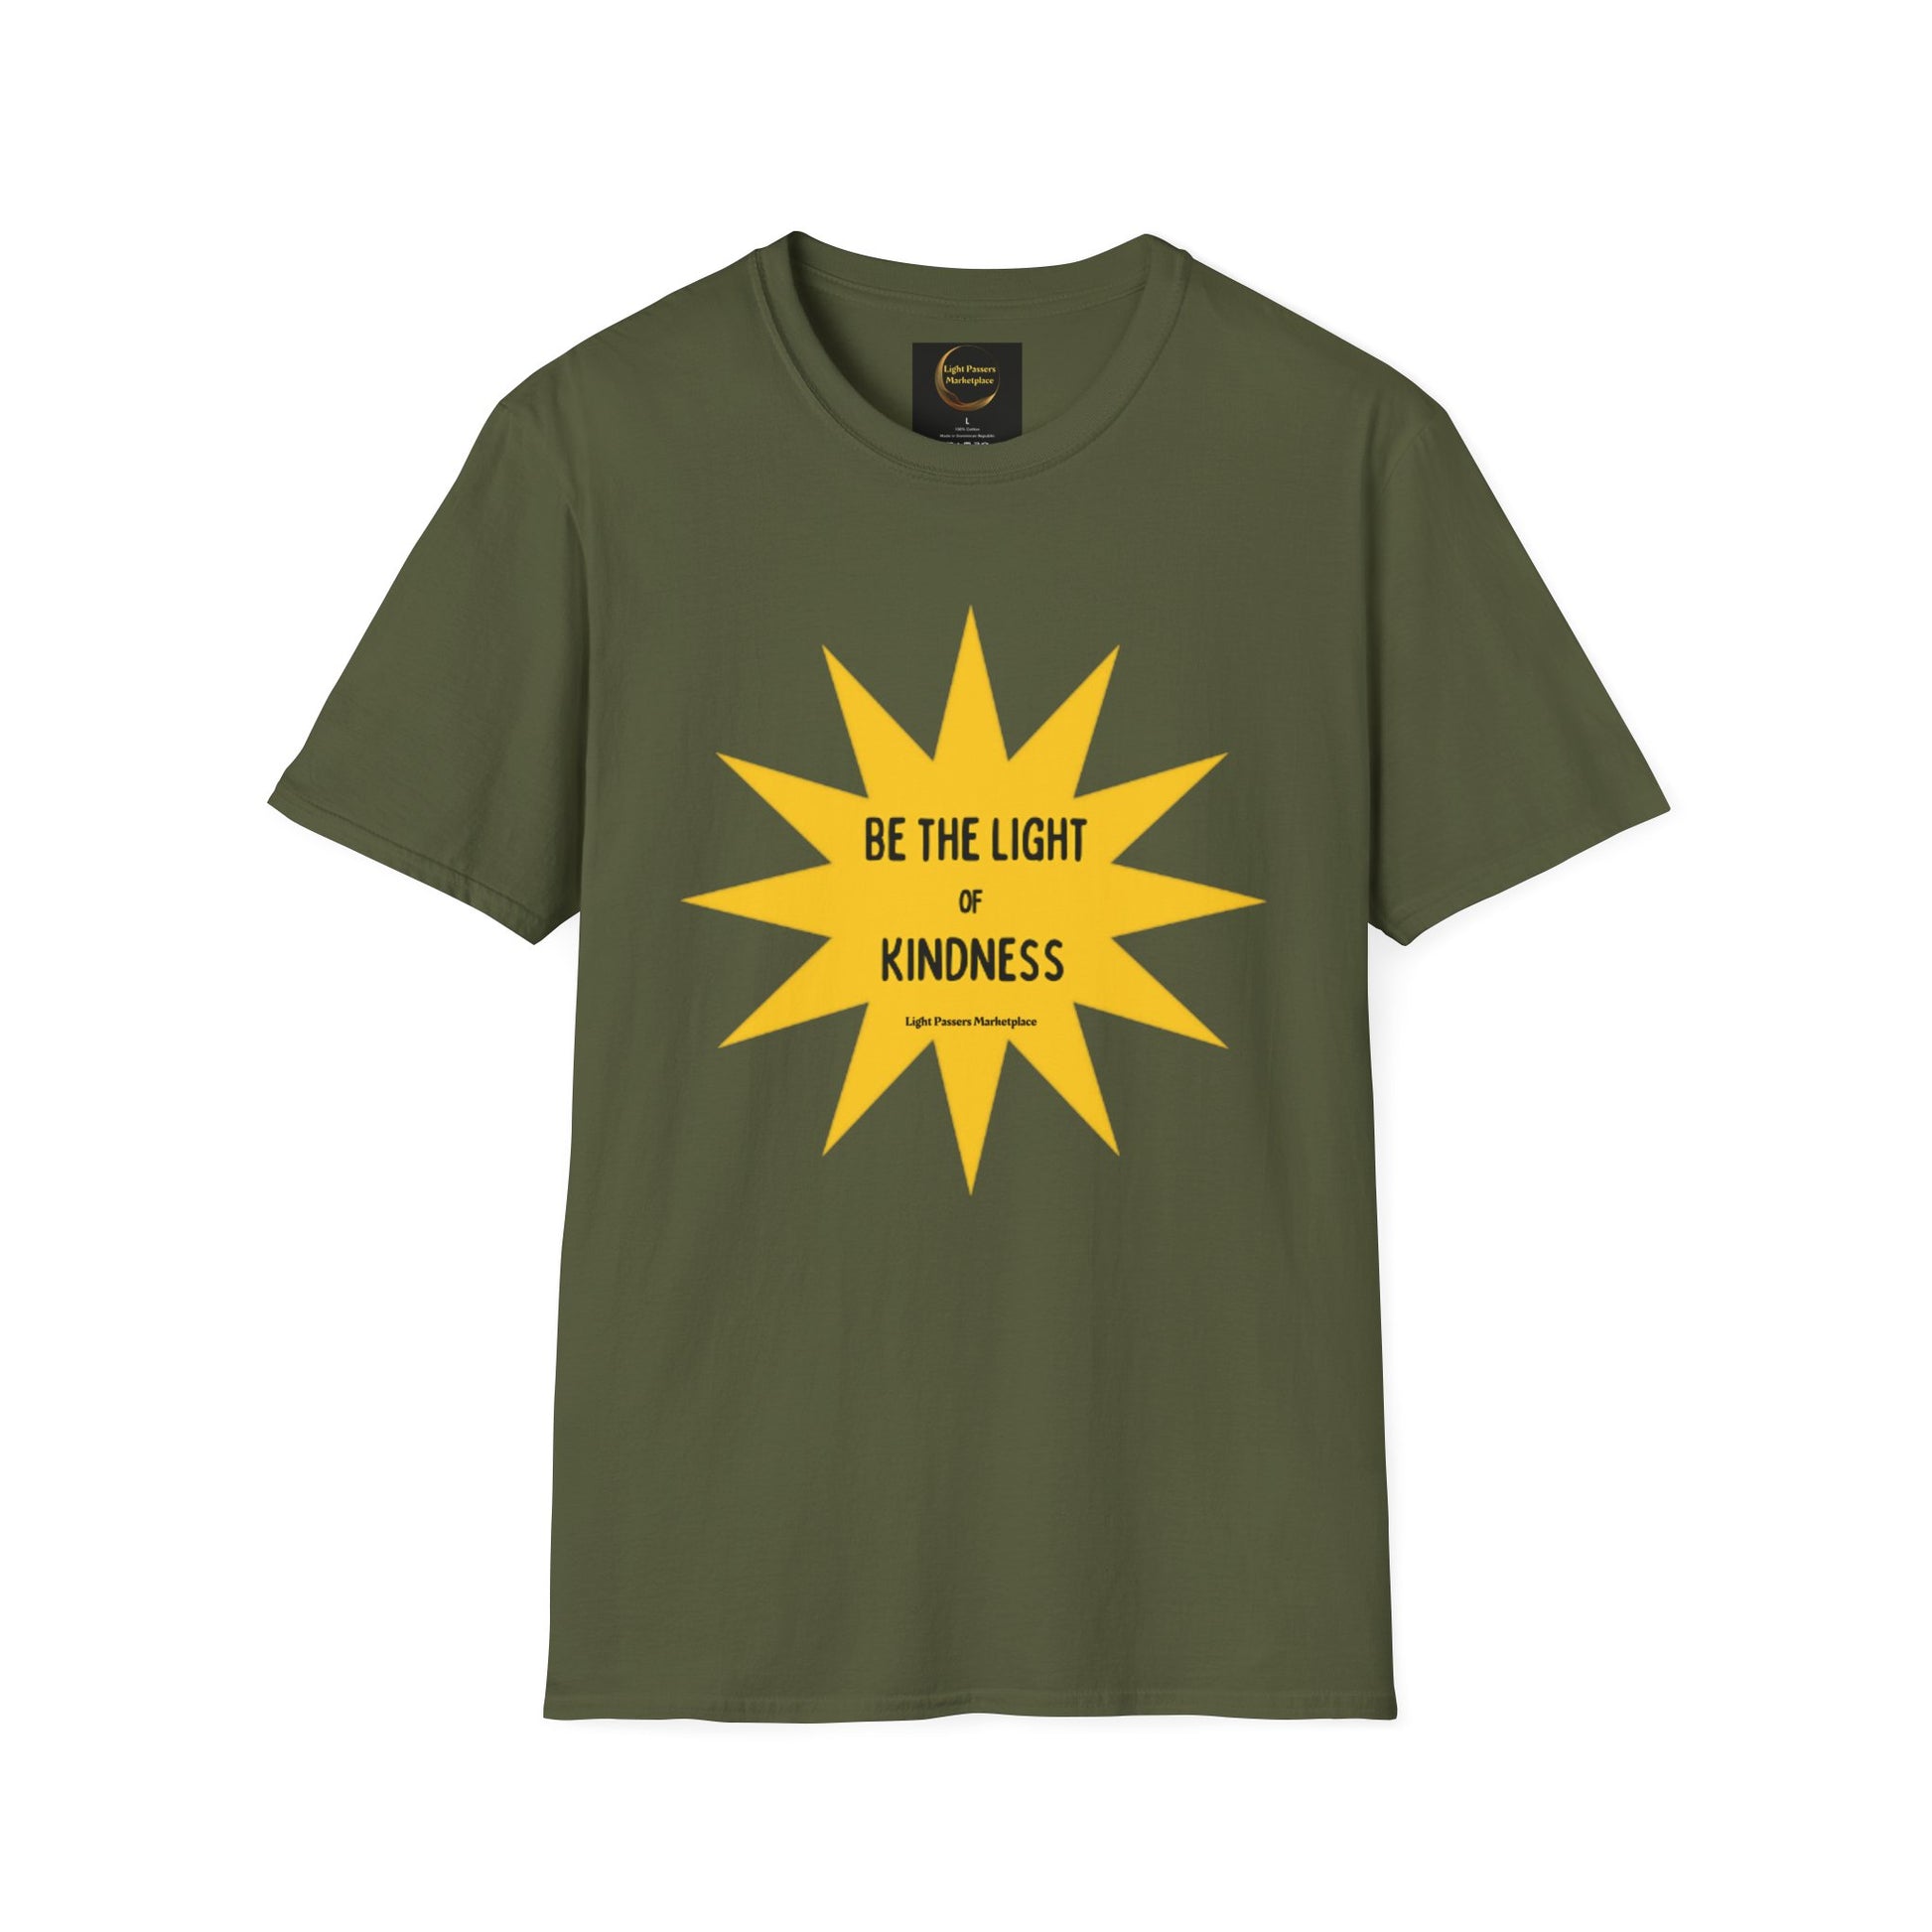 Unisex T-shirt featuring a yellow star and sun design on green fabric. 100% cotton, tear-away label, no side seams, medium fabric weight. Classic fit for casual comfort.